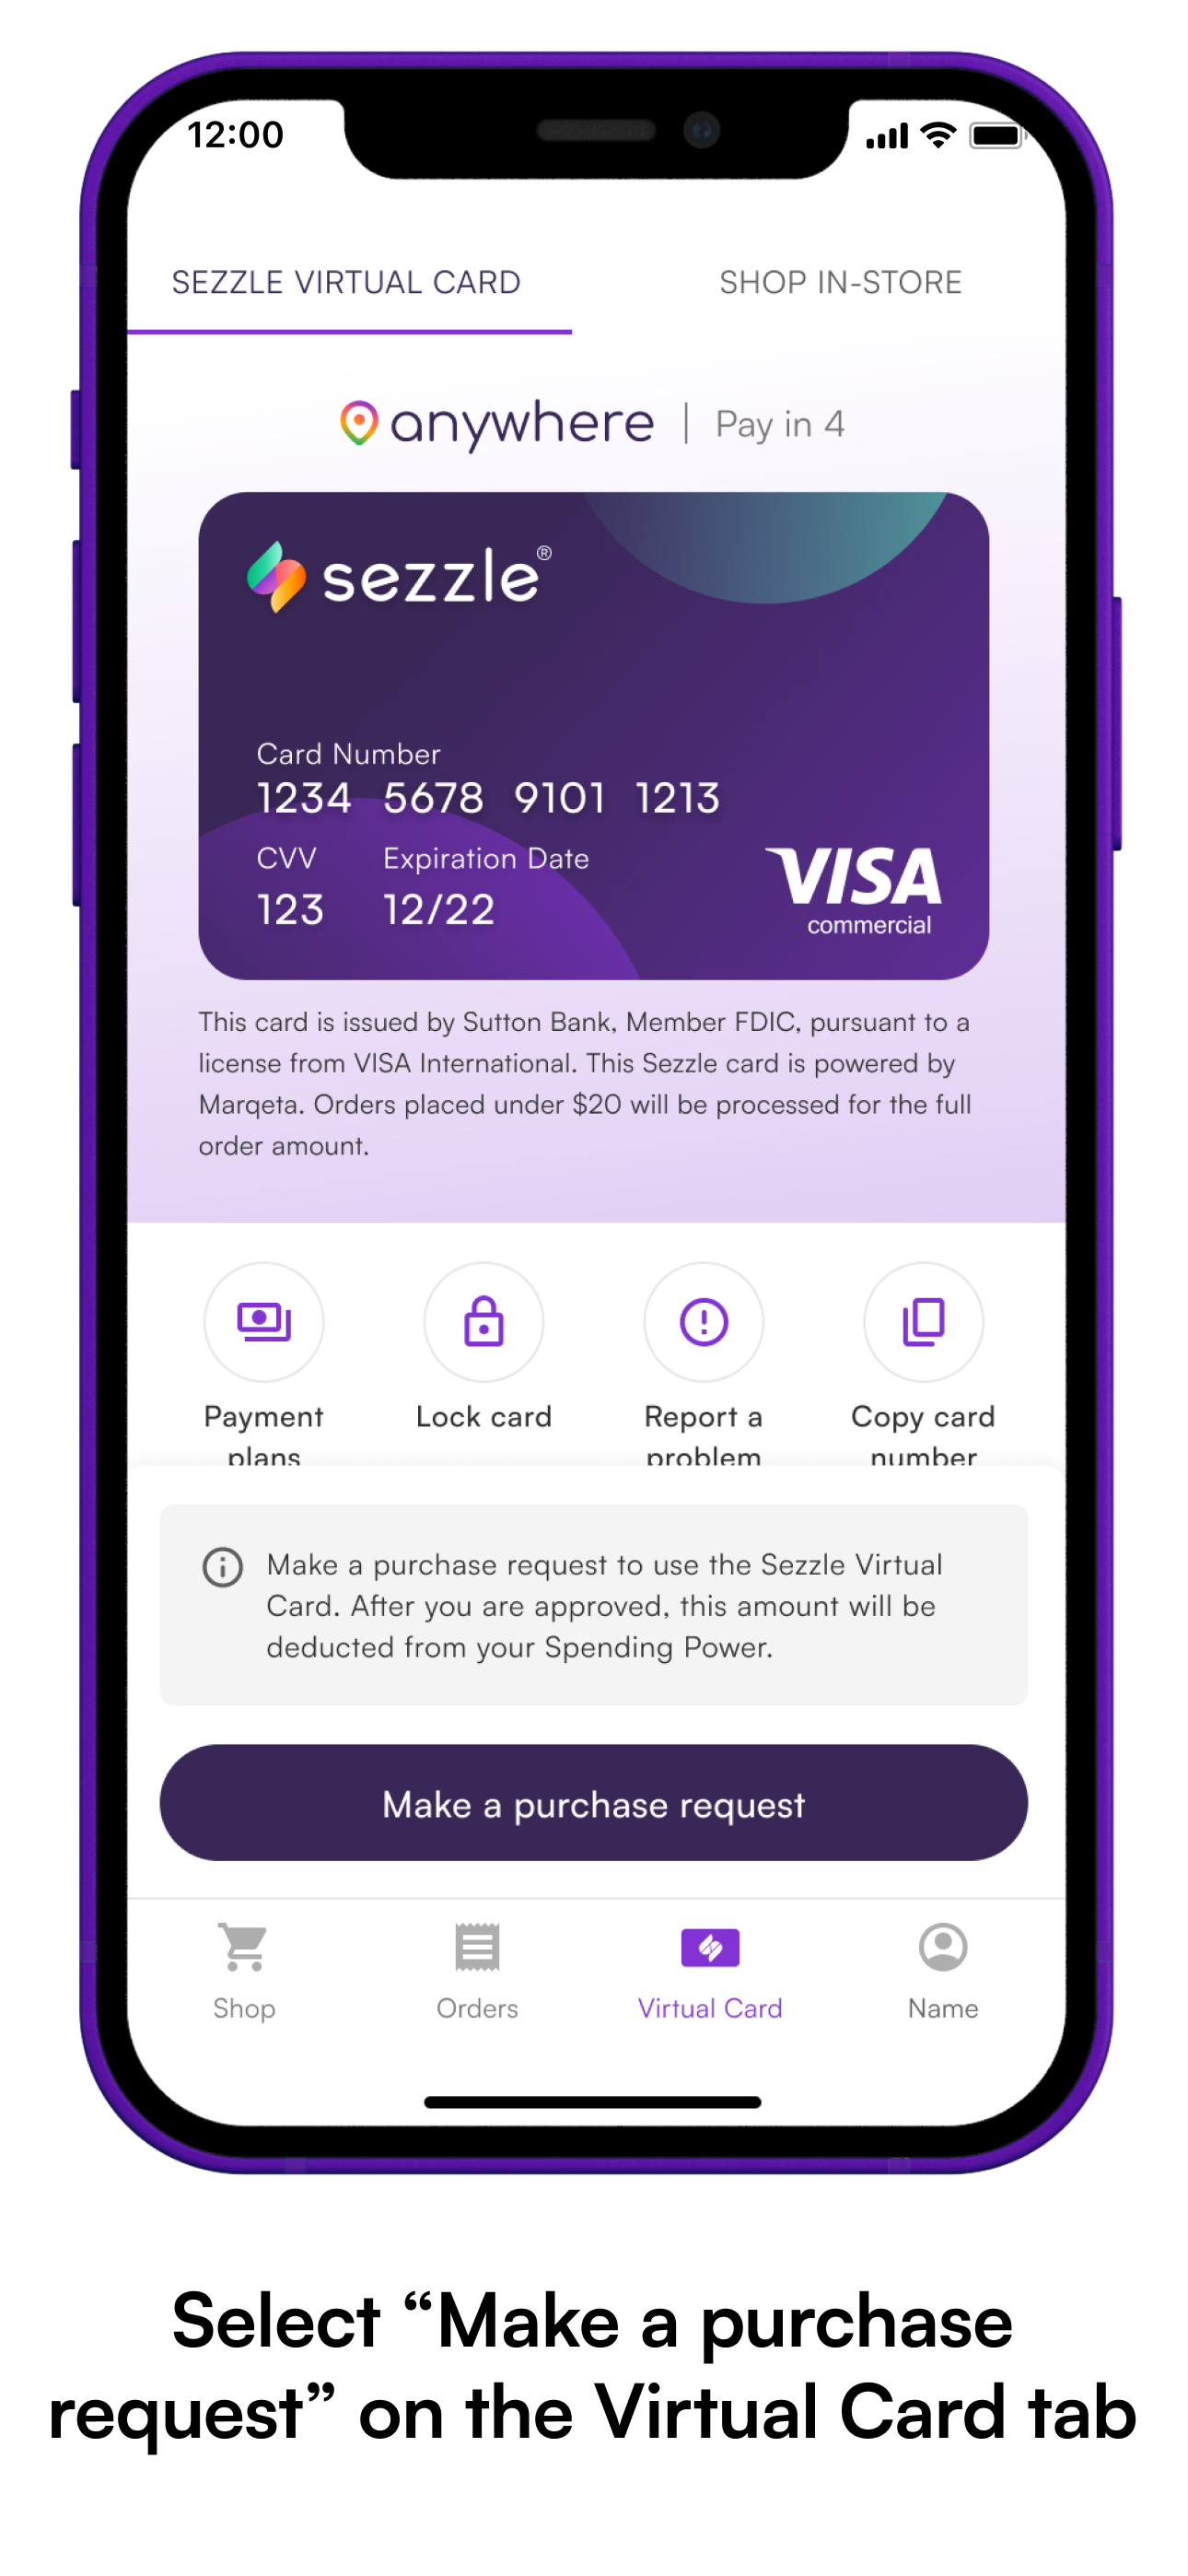 Phone screen showing the Sezzle Virtual Card details. Select "Make a purchase request" on the Virtual Card tab